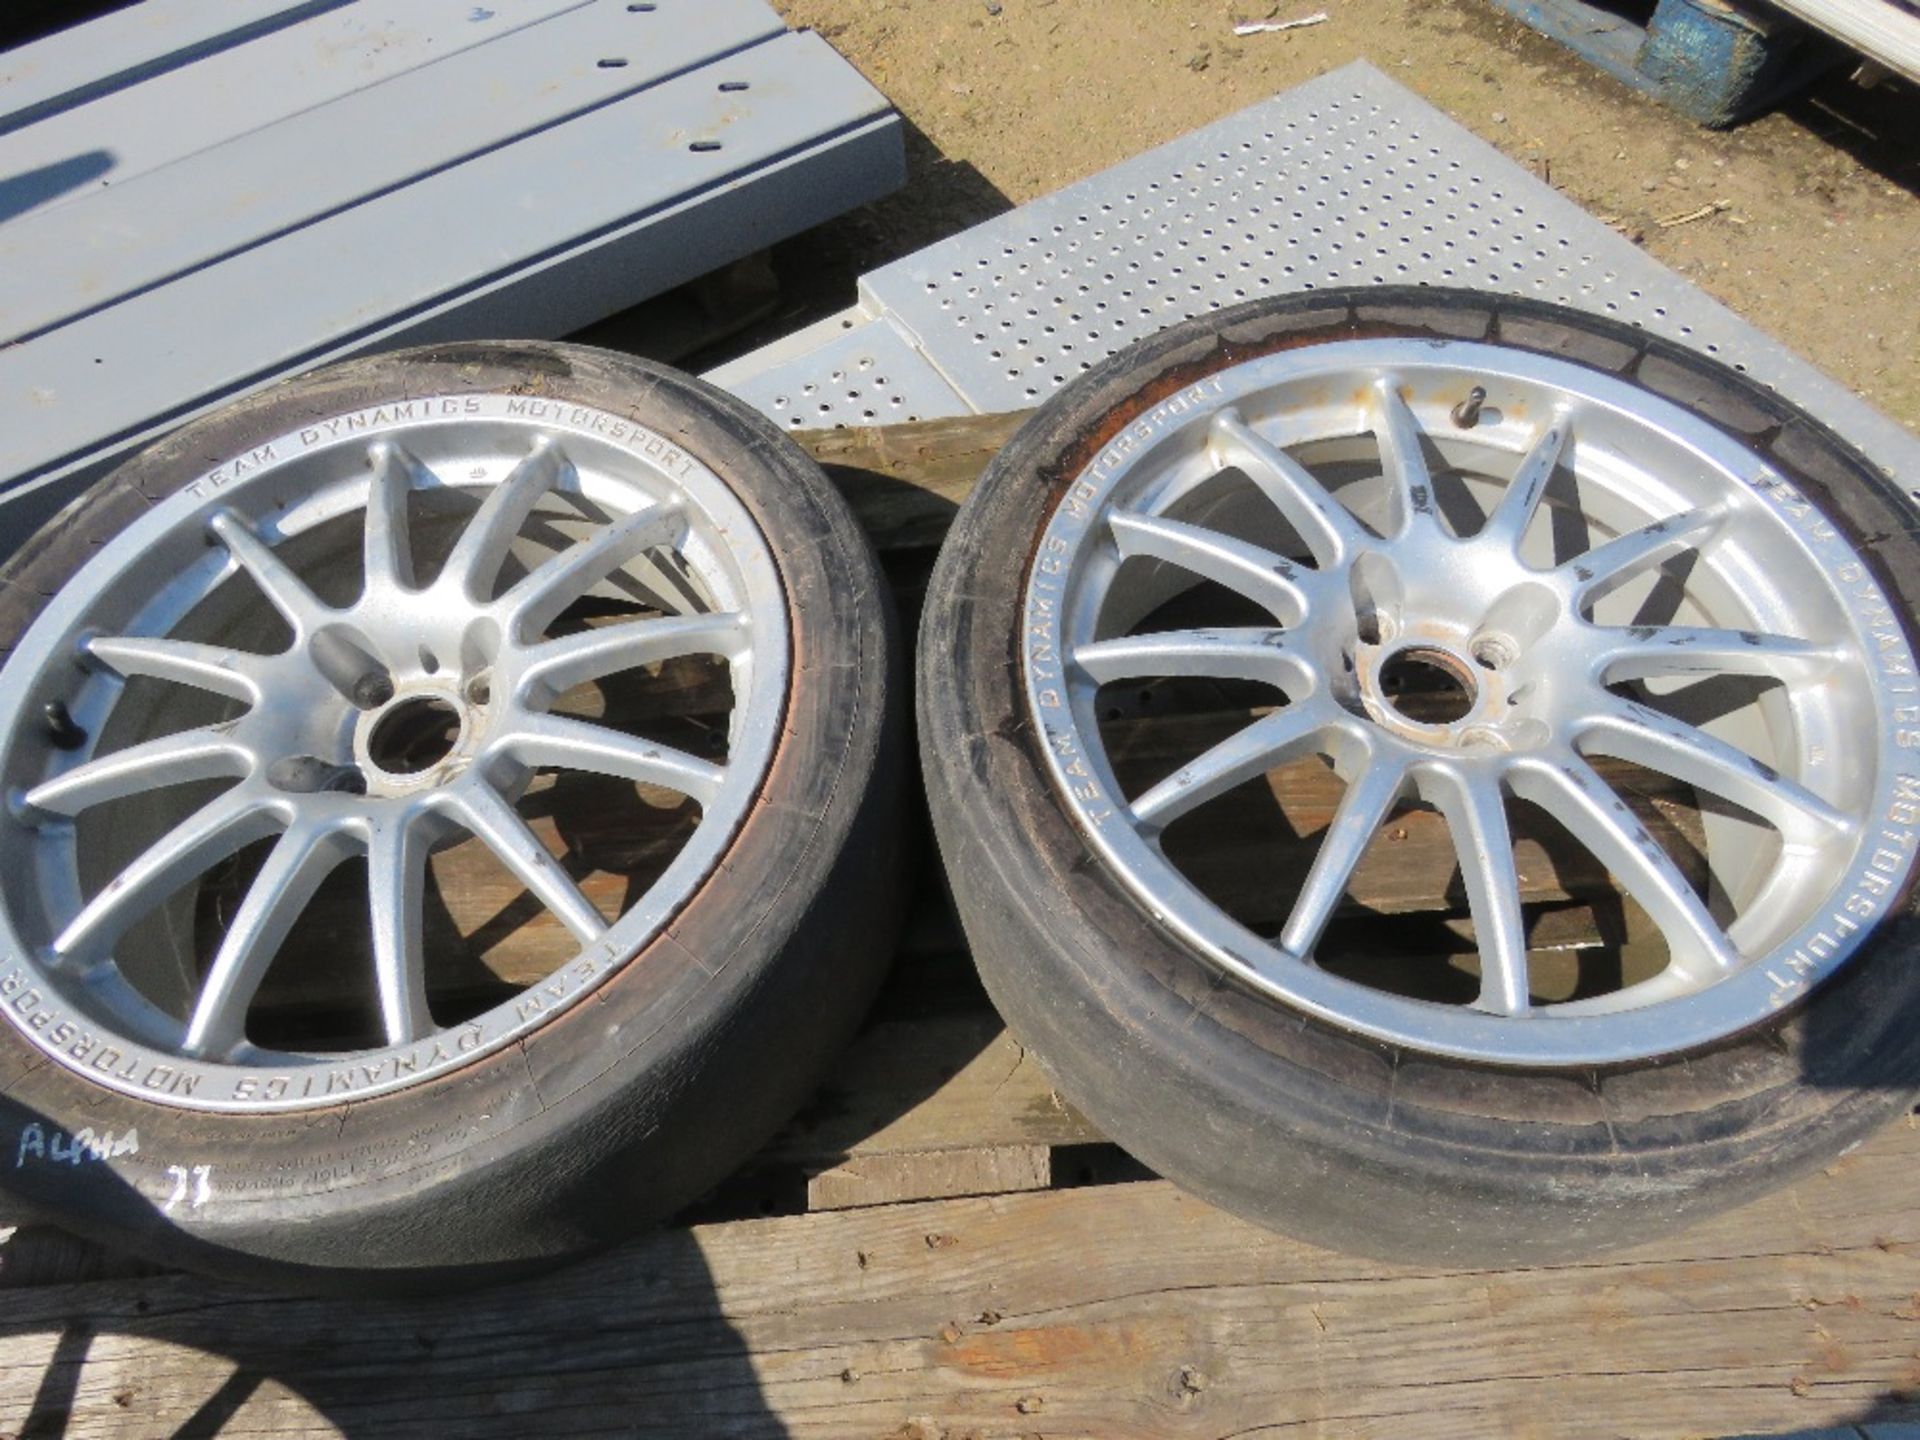 SET OF 4NO TEAM DYNAMICS MOTORSPORT RACING WHEELS AND TYRES, PREVIOUSLY USED ON AN ALFA ROMEO 33 RA - Image 4 of 4